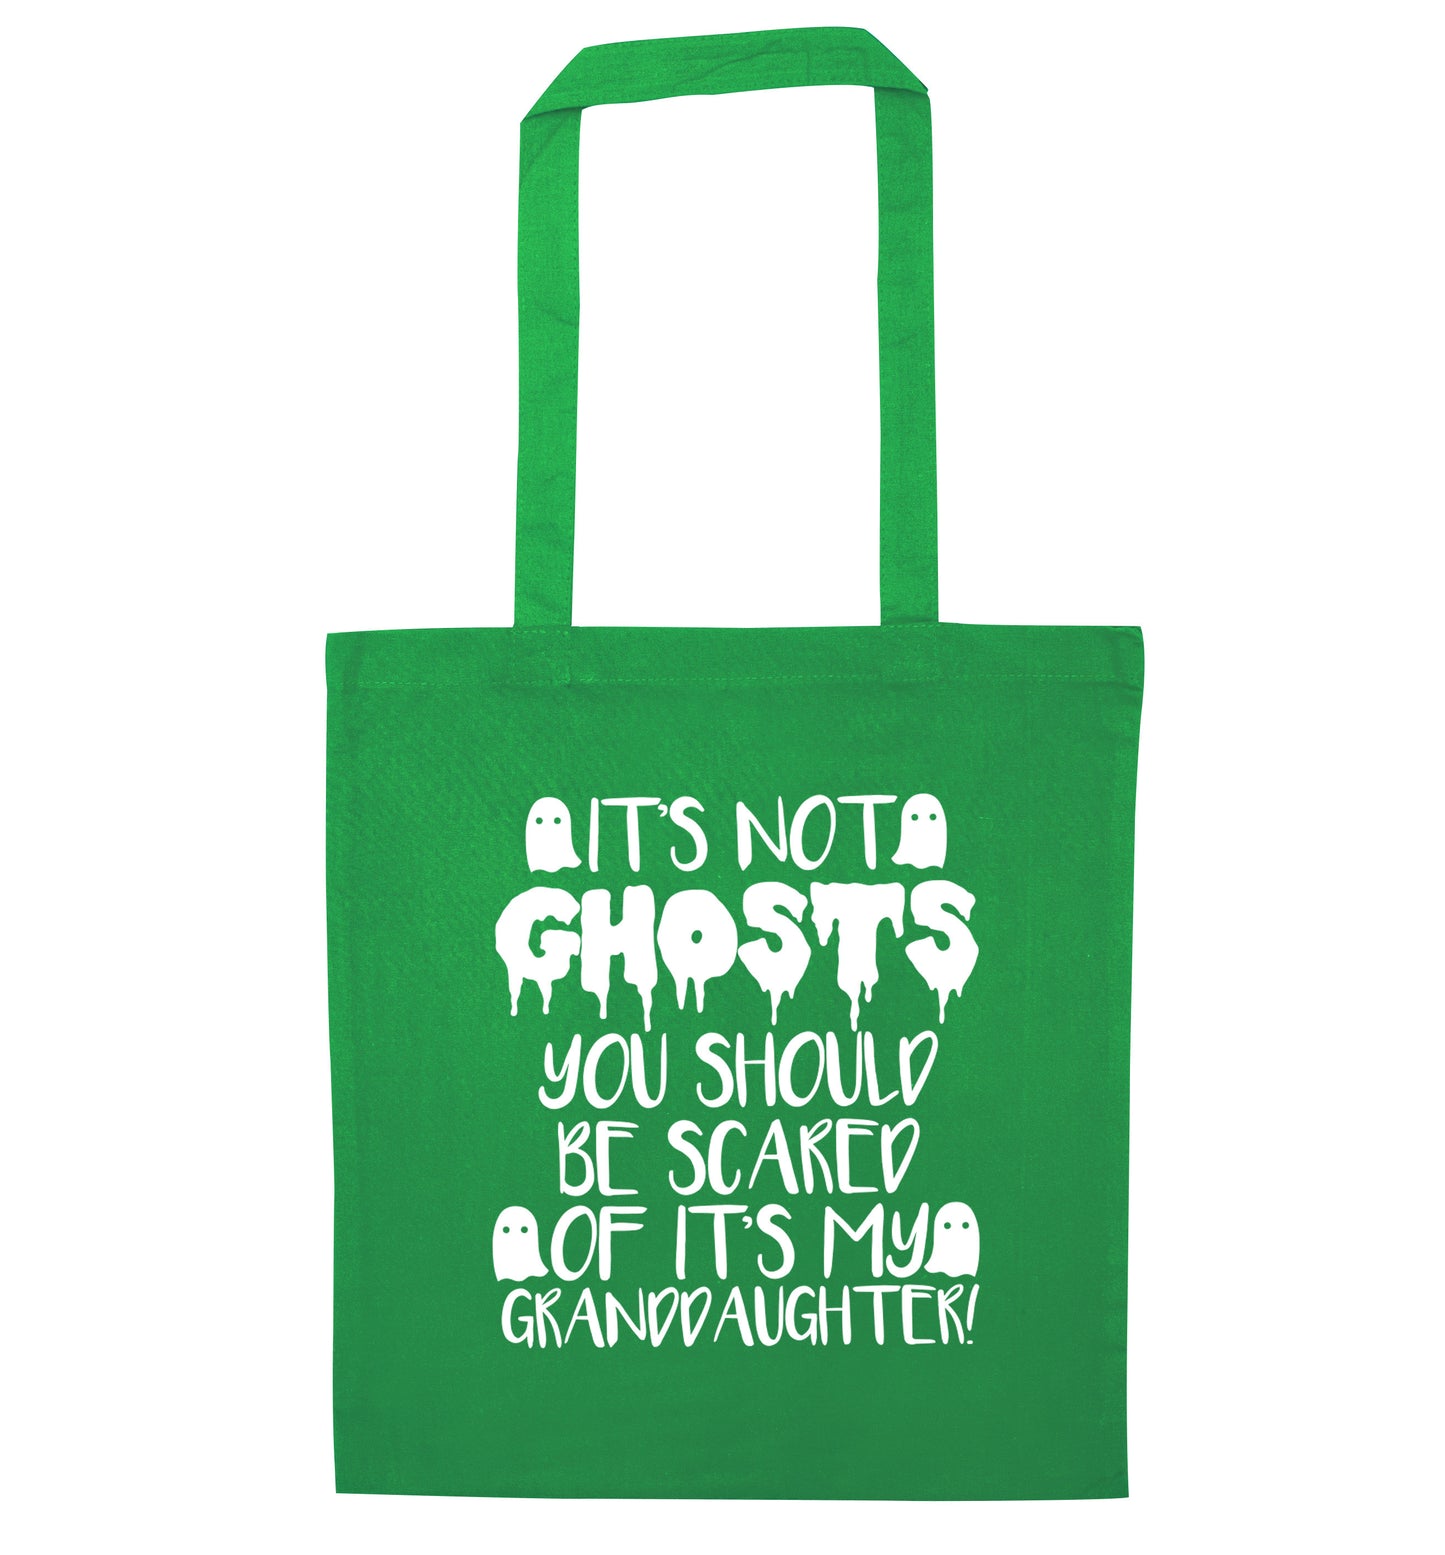 It's not ghosts you should be scared of it's my granddaughter! green tote bag